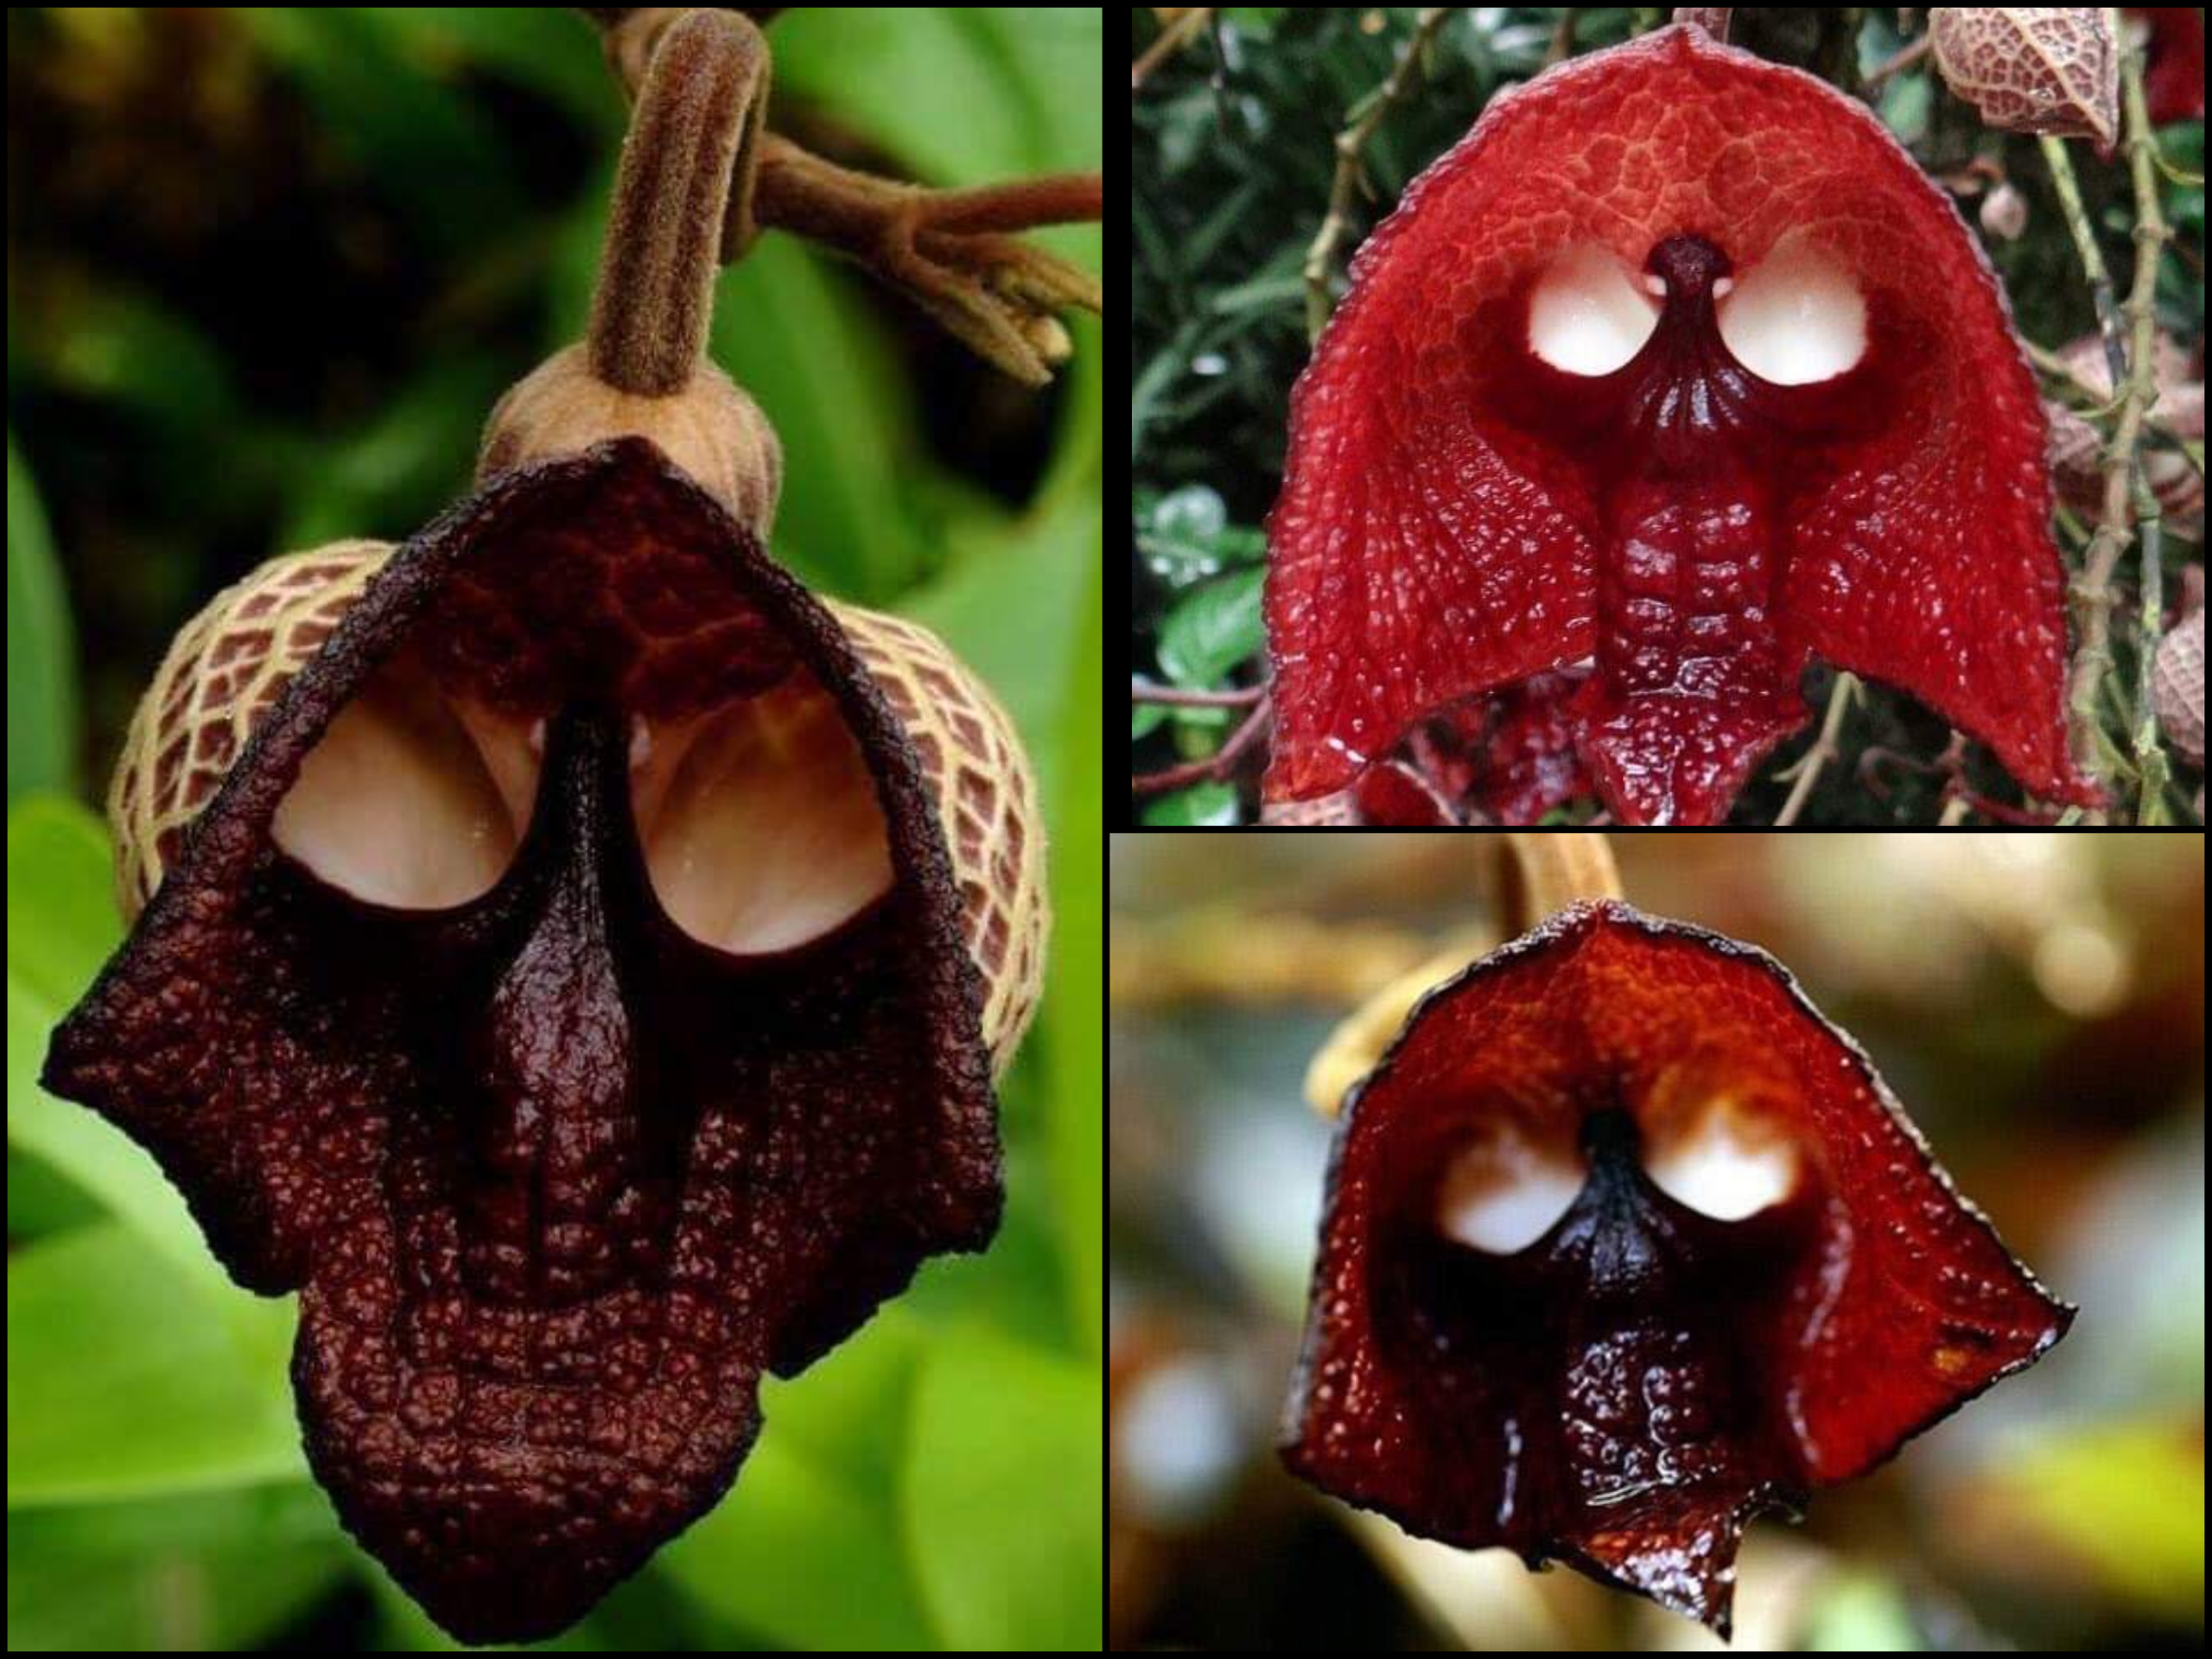 Aristolochia+Salvadorensis+Orchid%2C+also+known+as+The+Darth+Vader+Flower